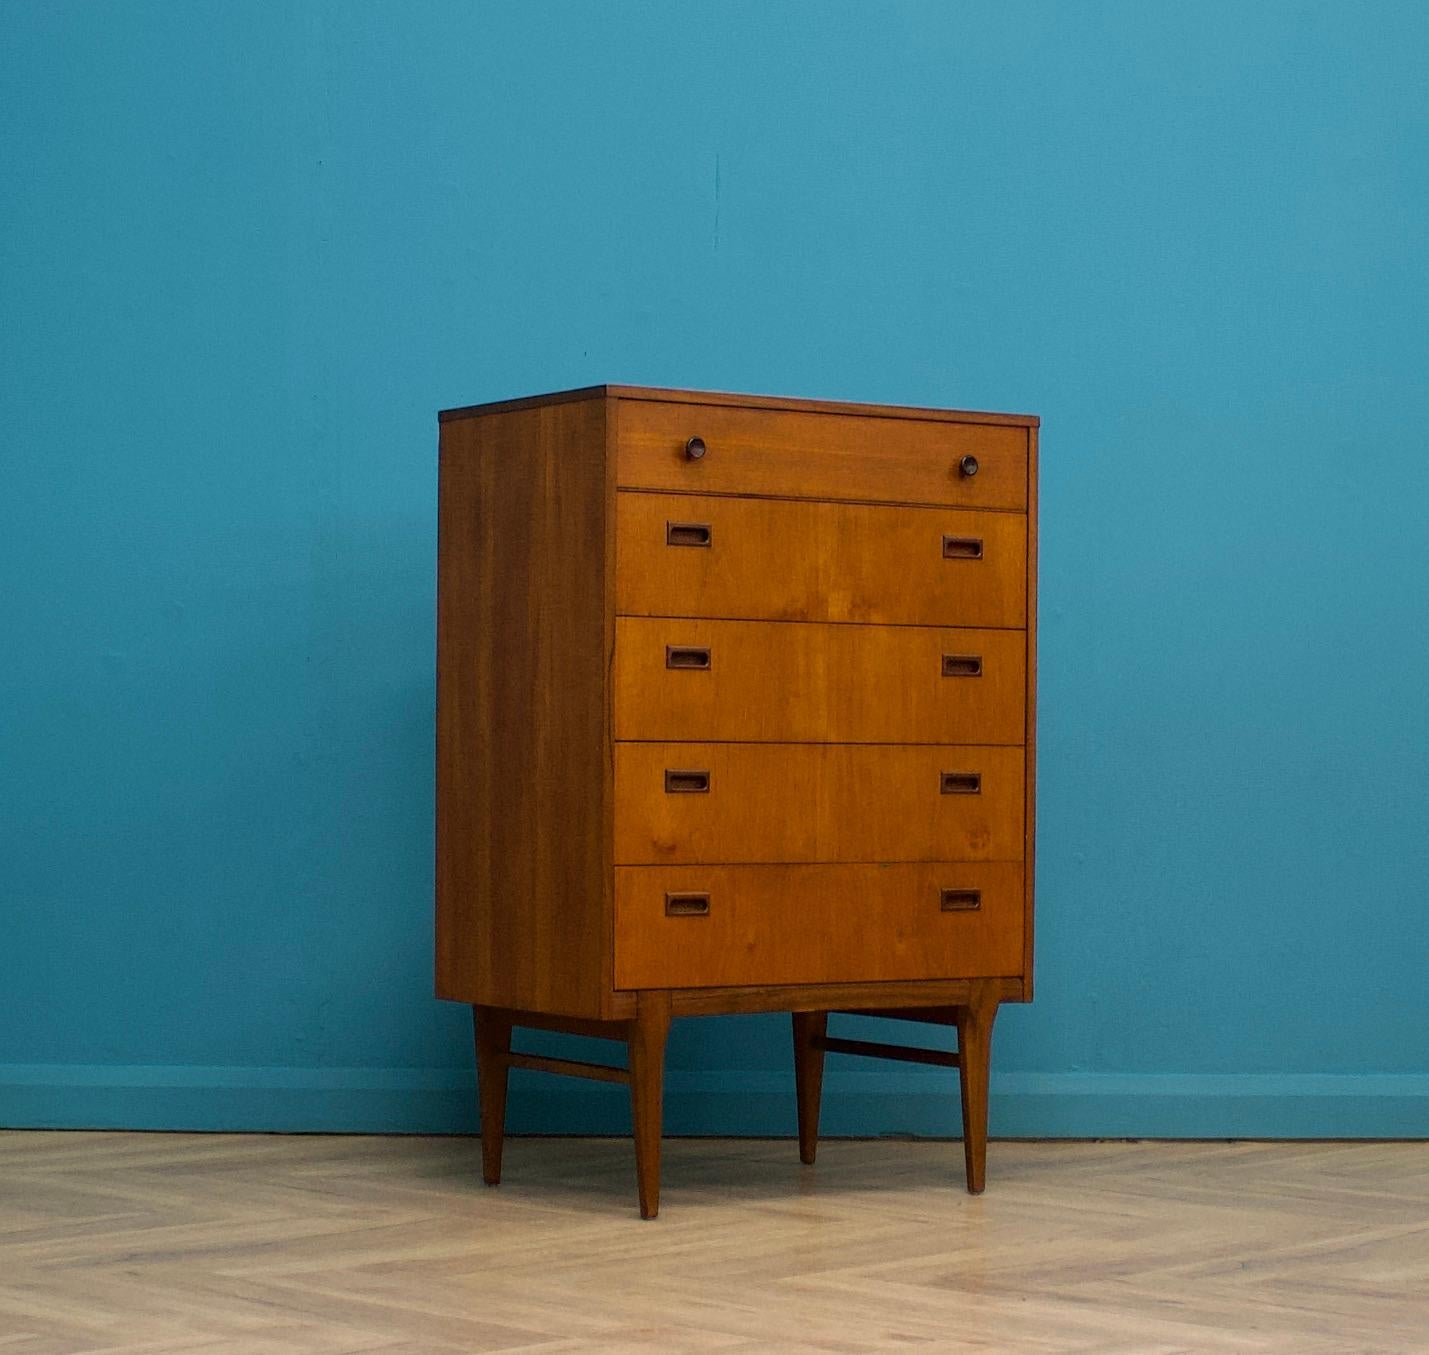 A mid century teak tallboy chest of drawers from the quality furniture makers, Nathan, circa 1960s
There are five drawers in total